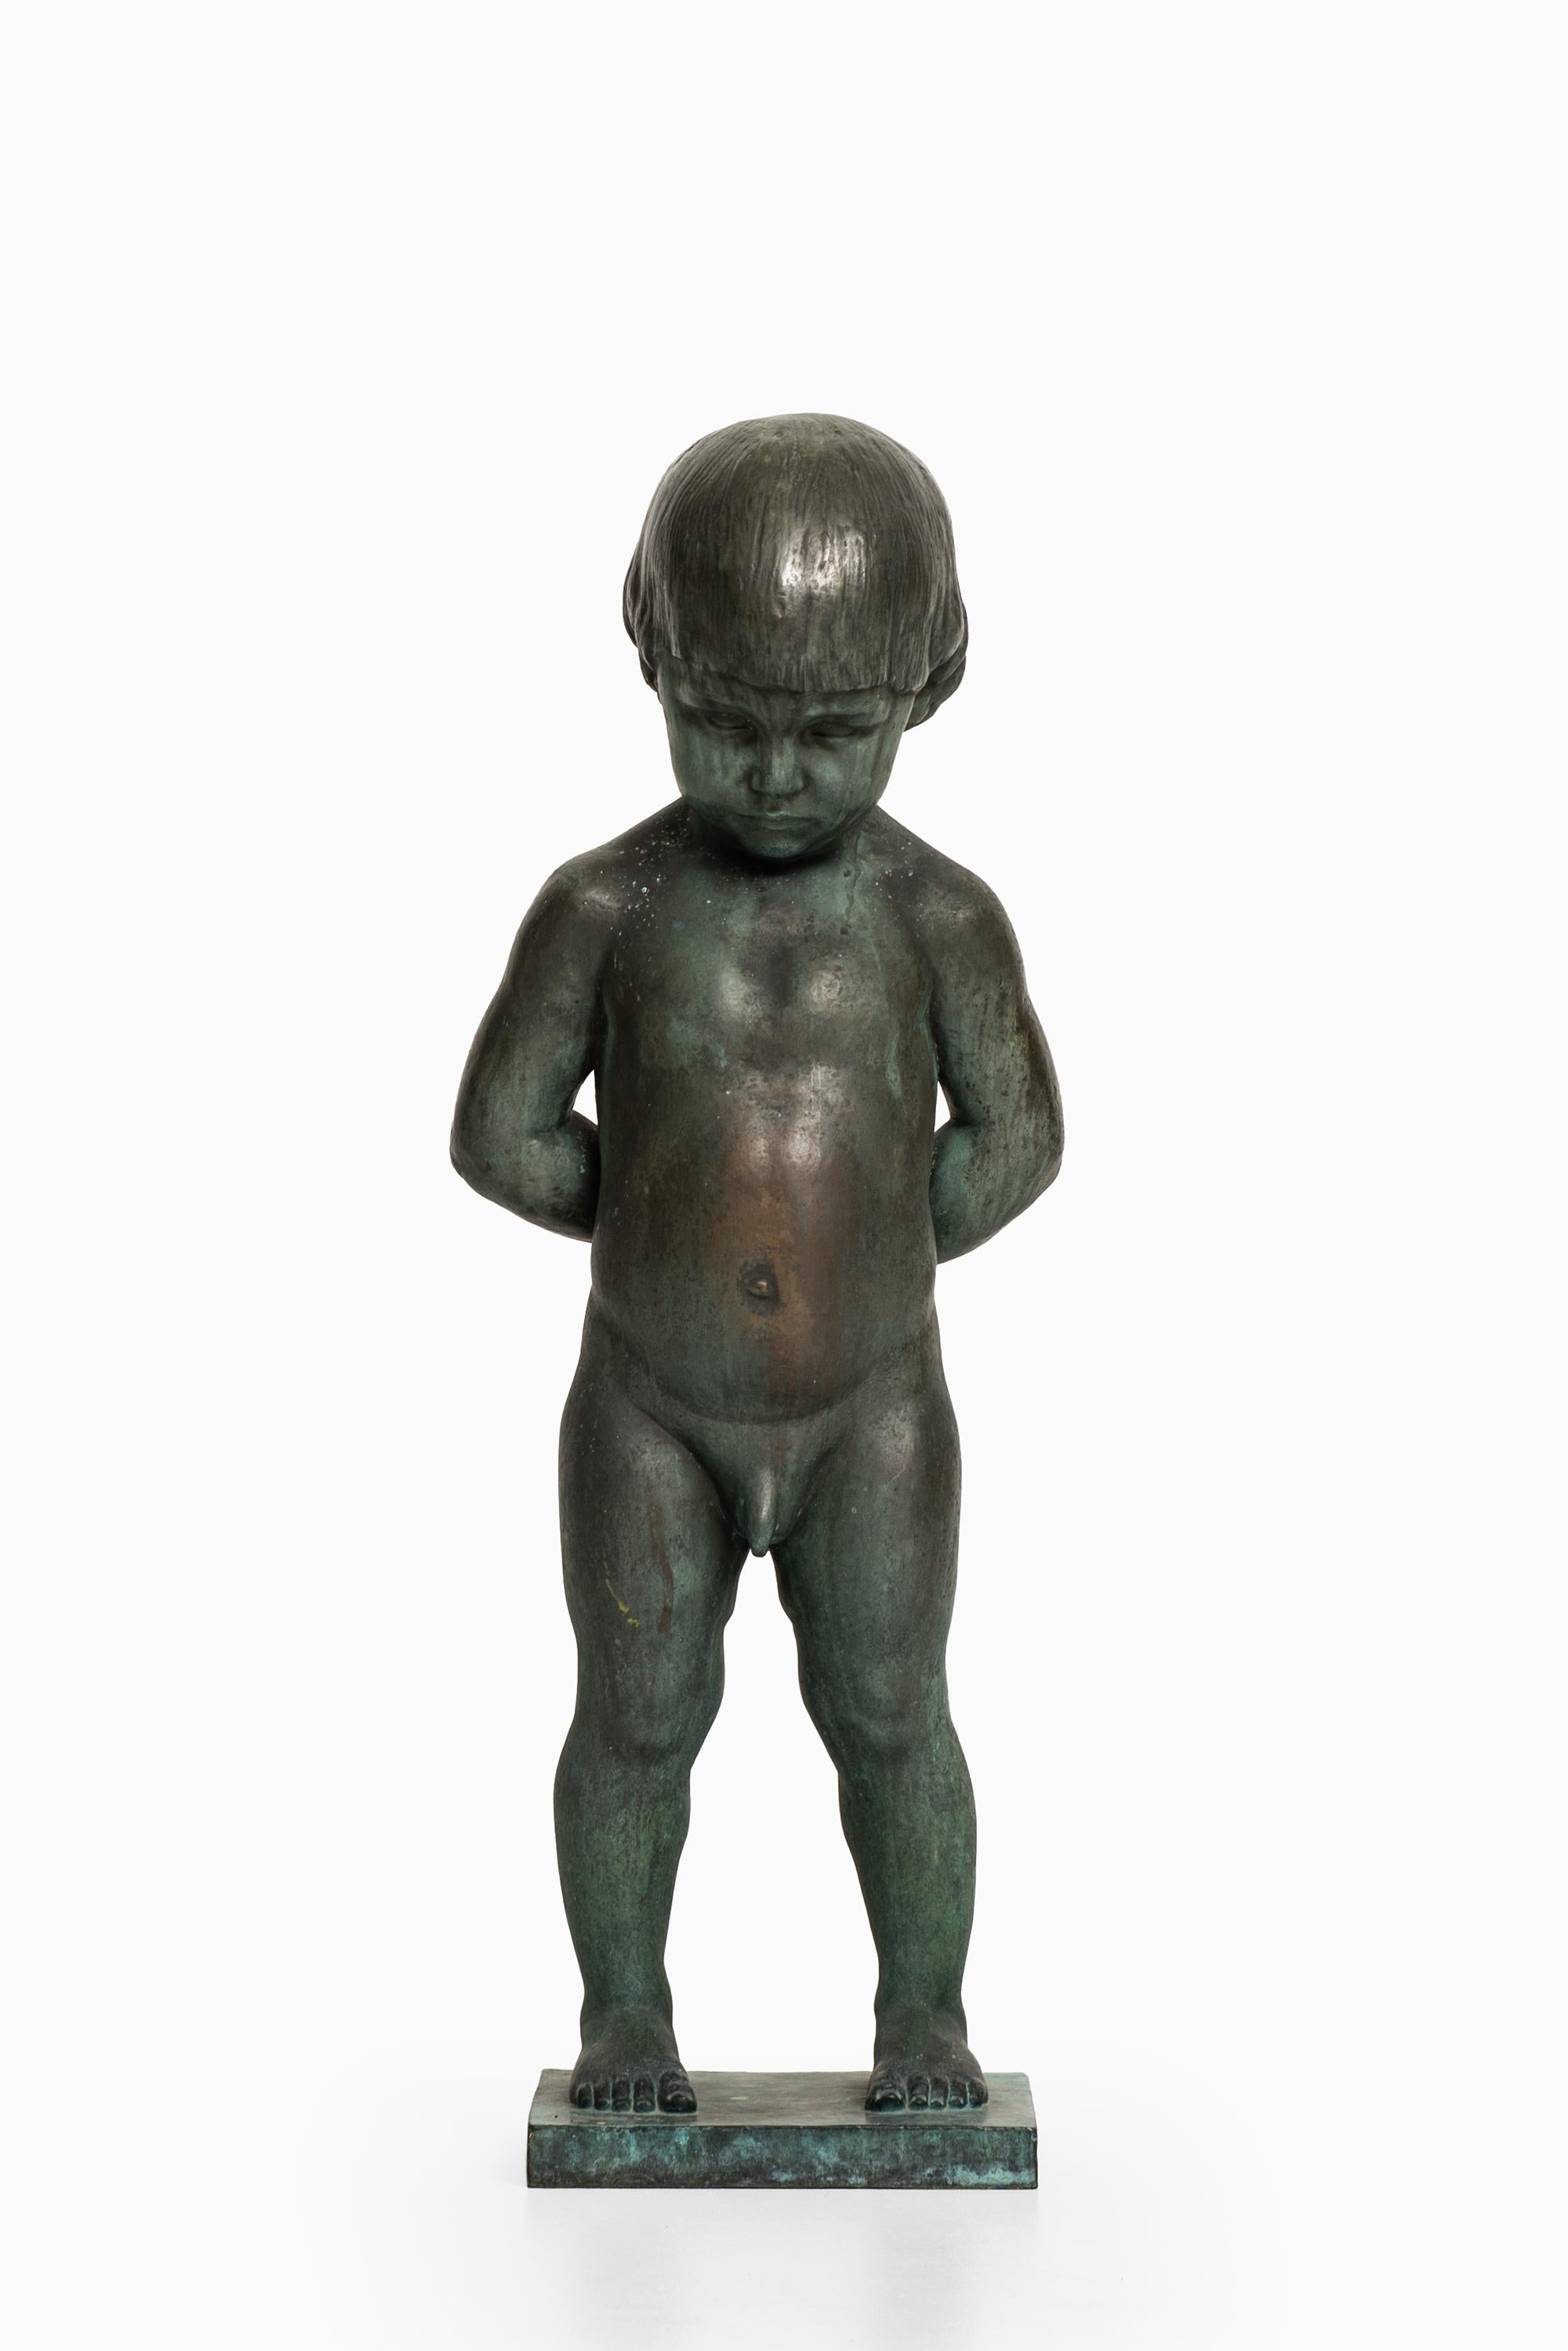 Sculpture ‘Boy with apple’ by Anders Jönsson. Founded mark Erik Pettersson fud. In Sweden.